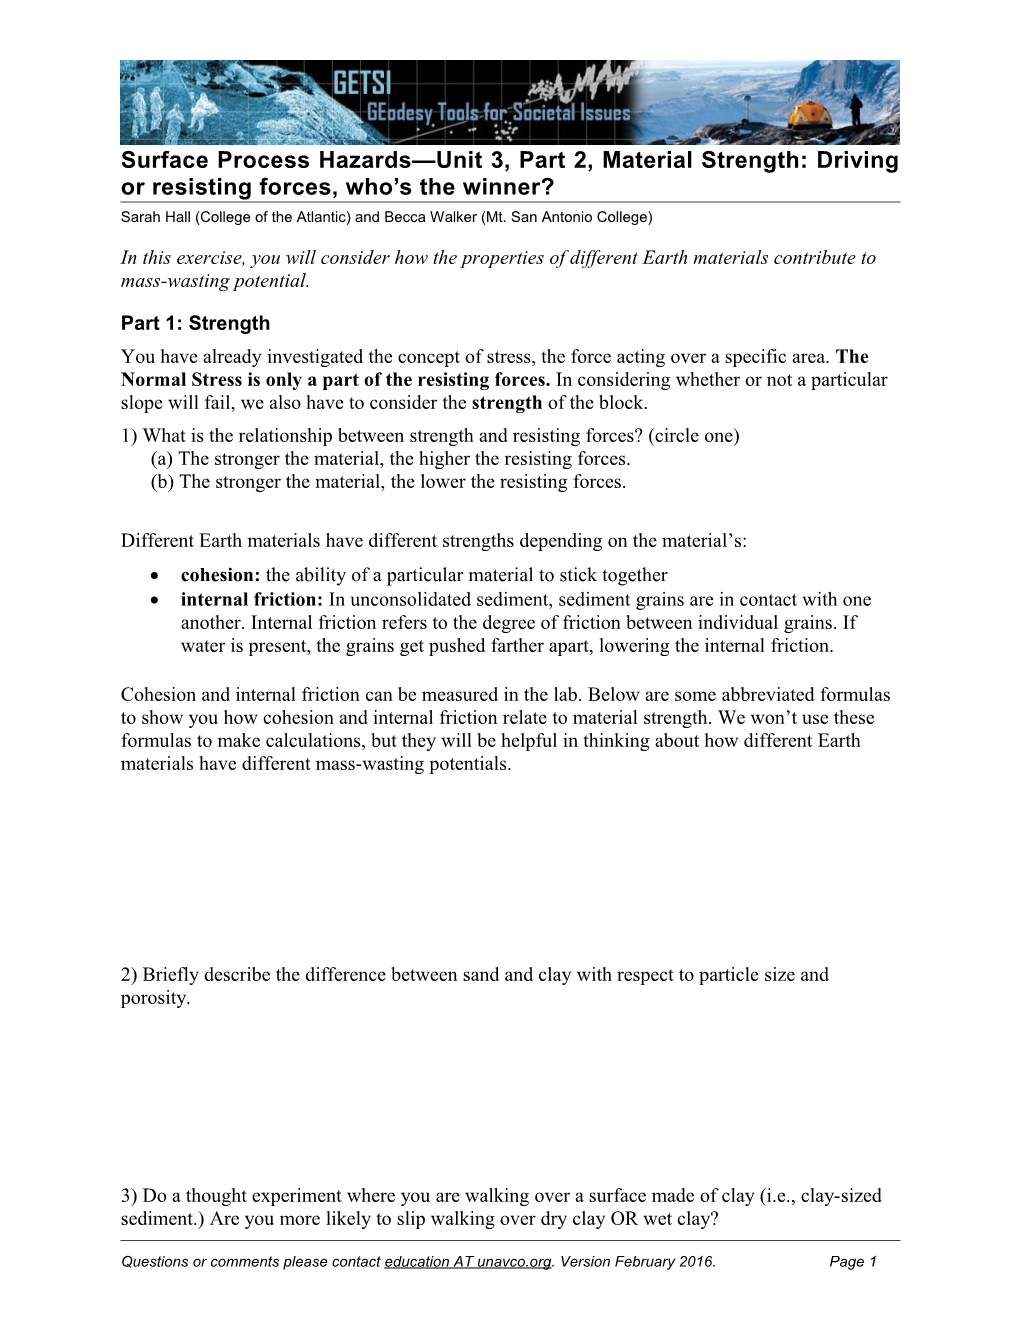 Surface Process Hazards Unit 3, Part 2, Material Strength: Driving Or Resisting Forces